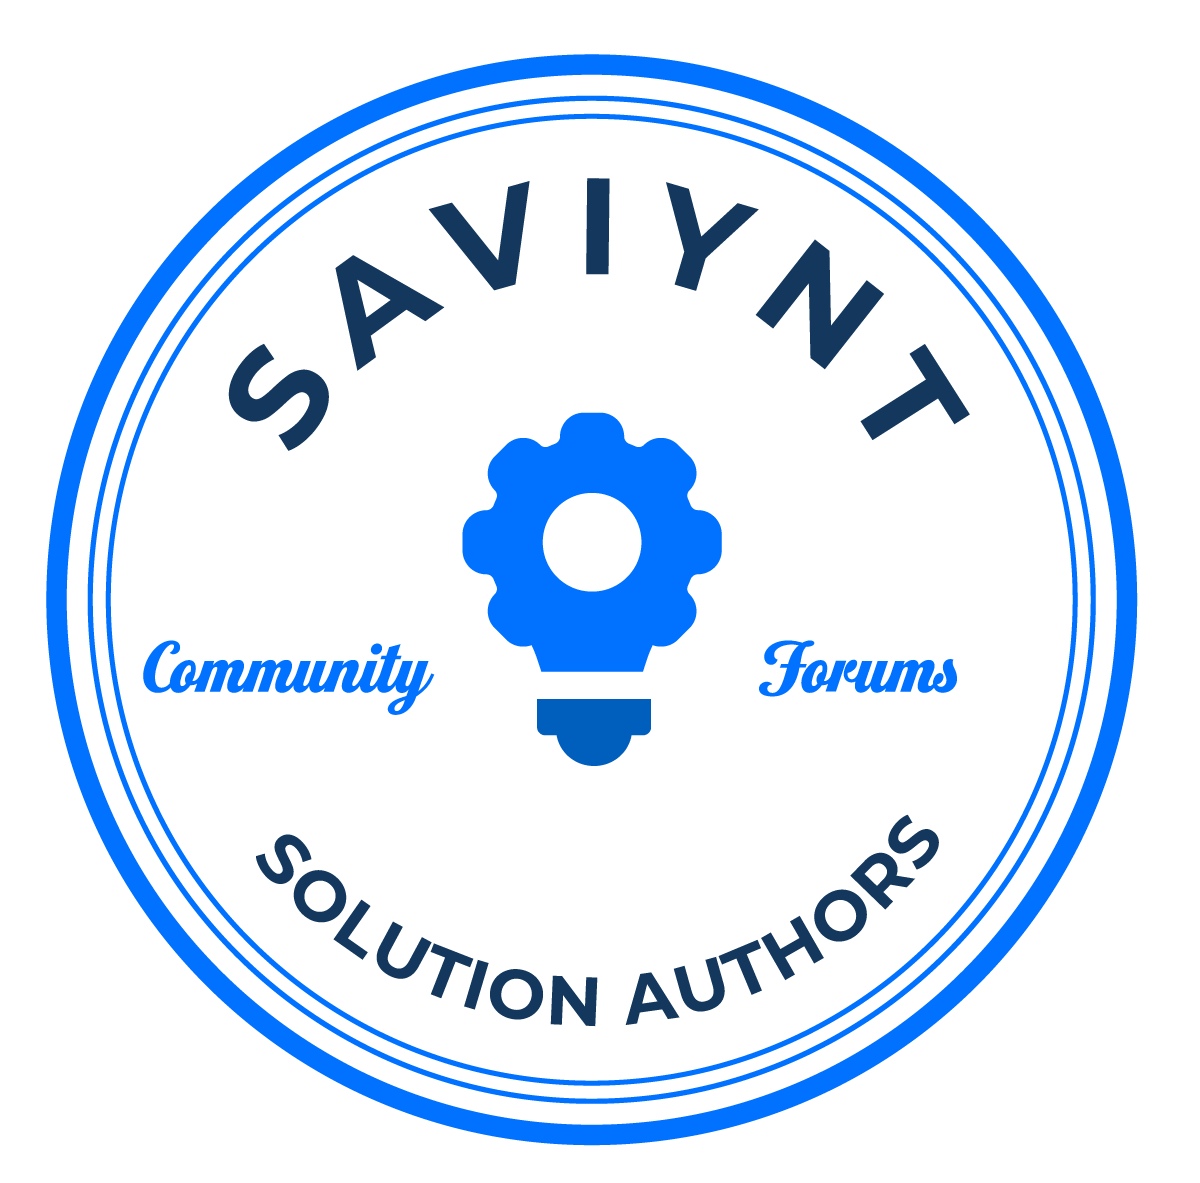 Top Solution Author